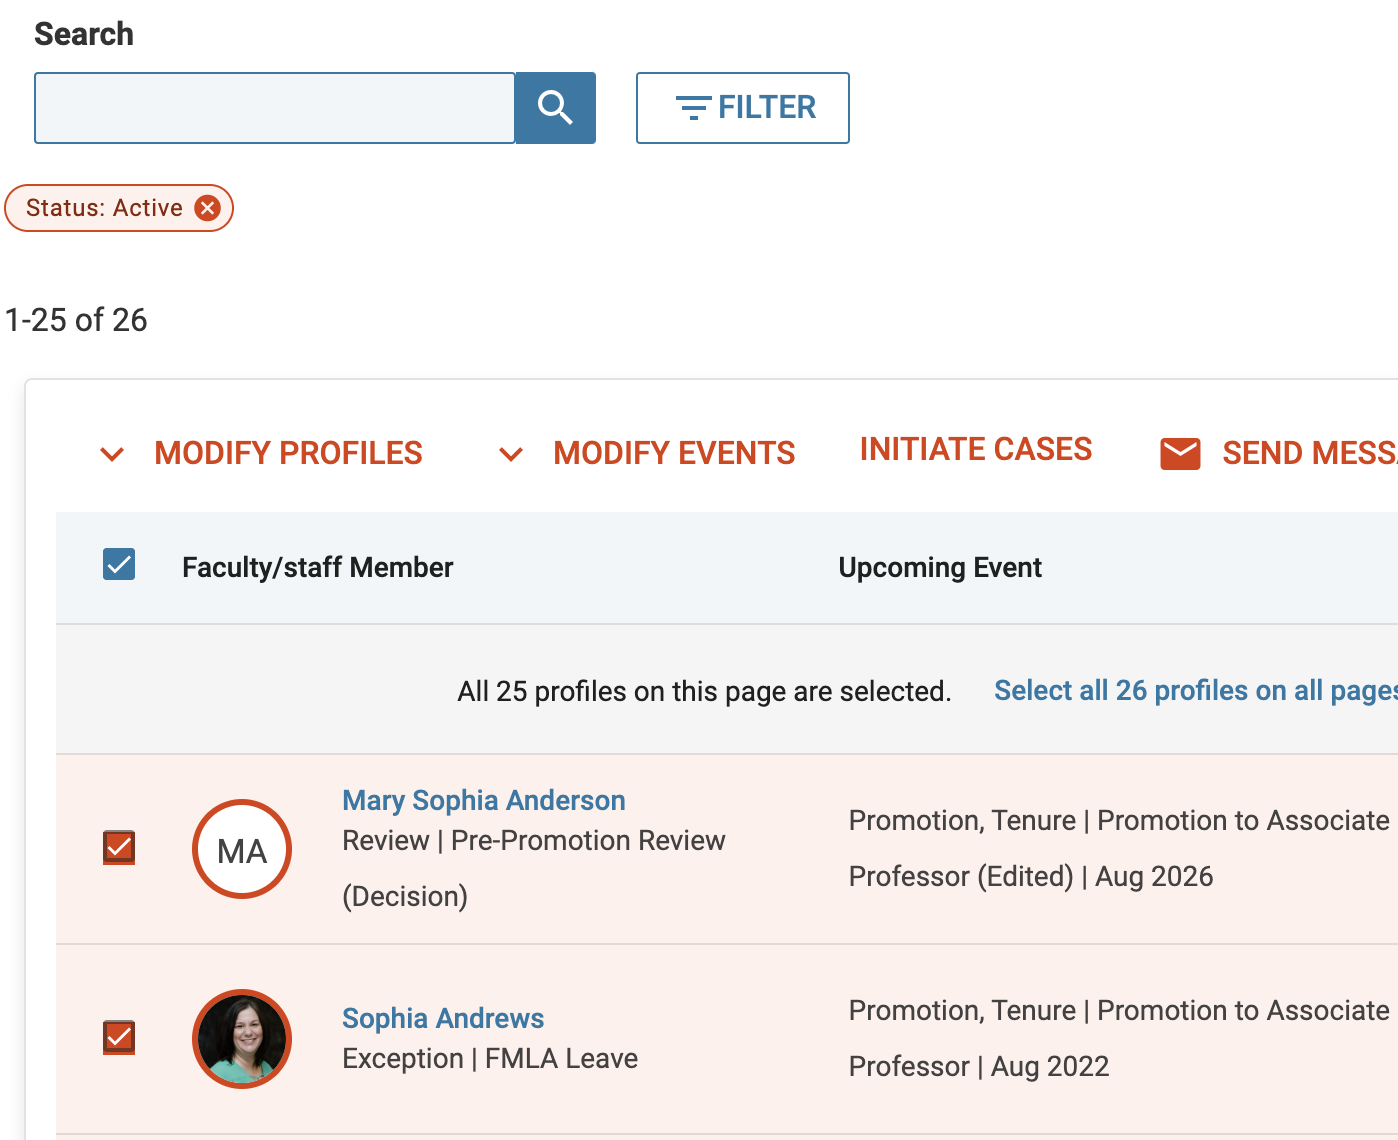 Faculty Selected and Modify Events button